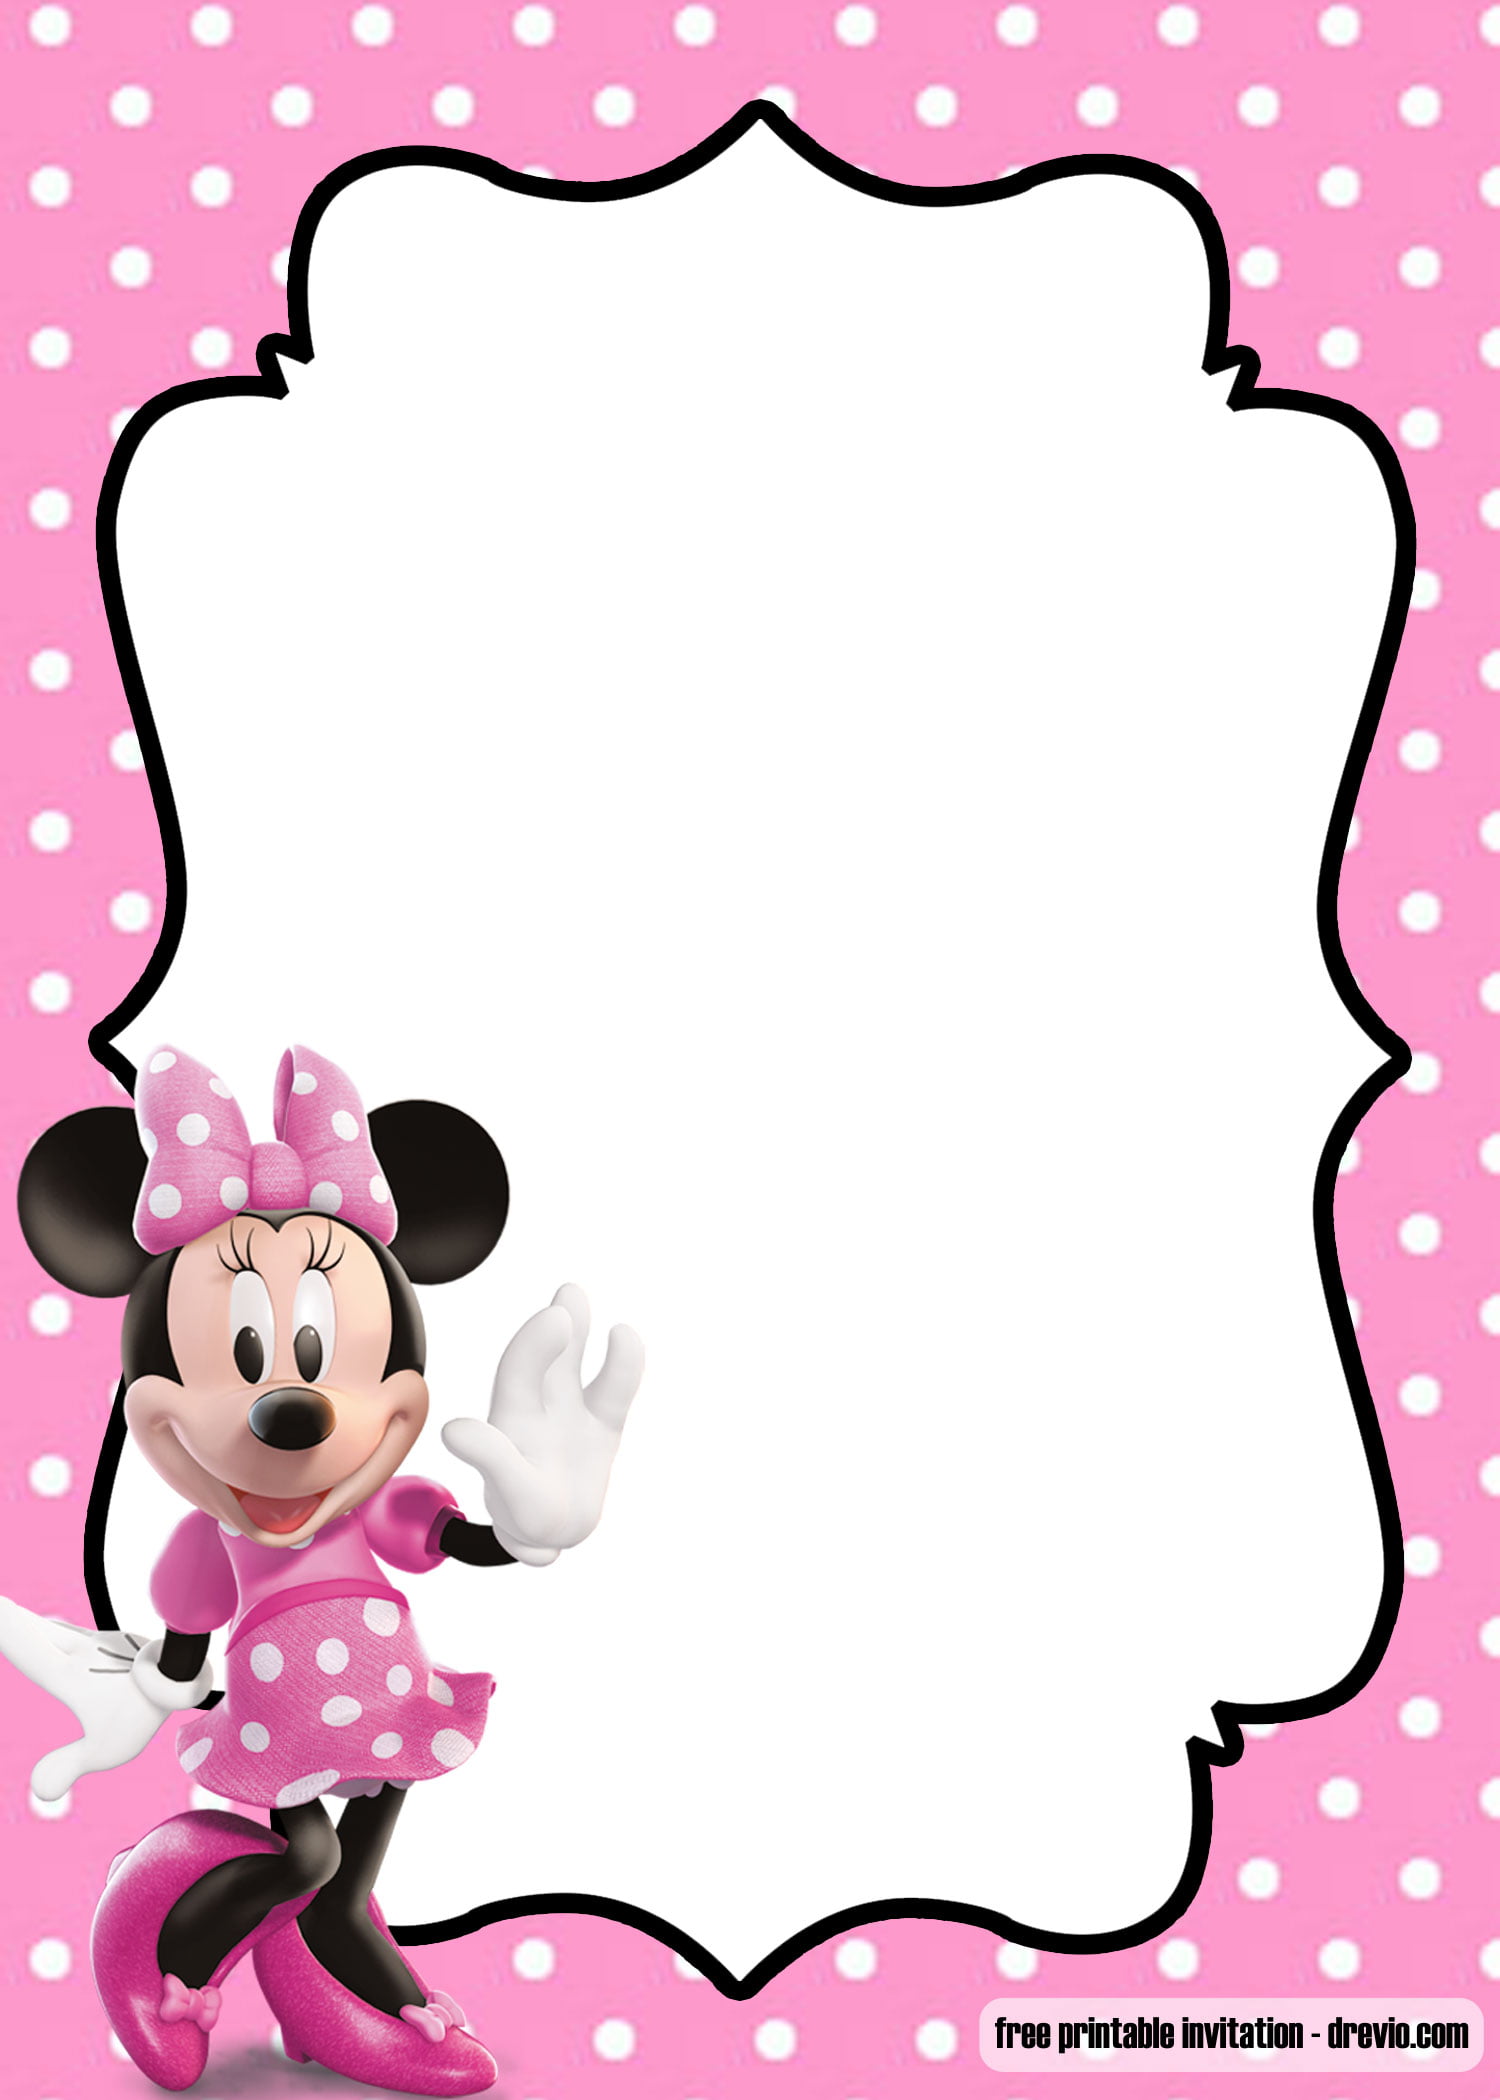 minnie-mouse-invitation-template-free-download-martin-printable-calendars